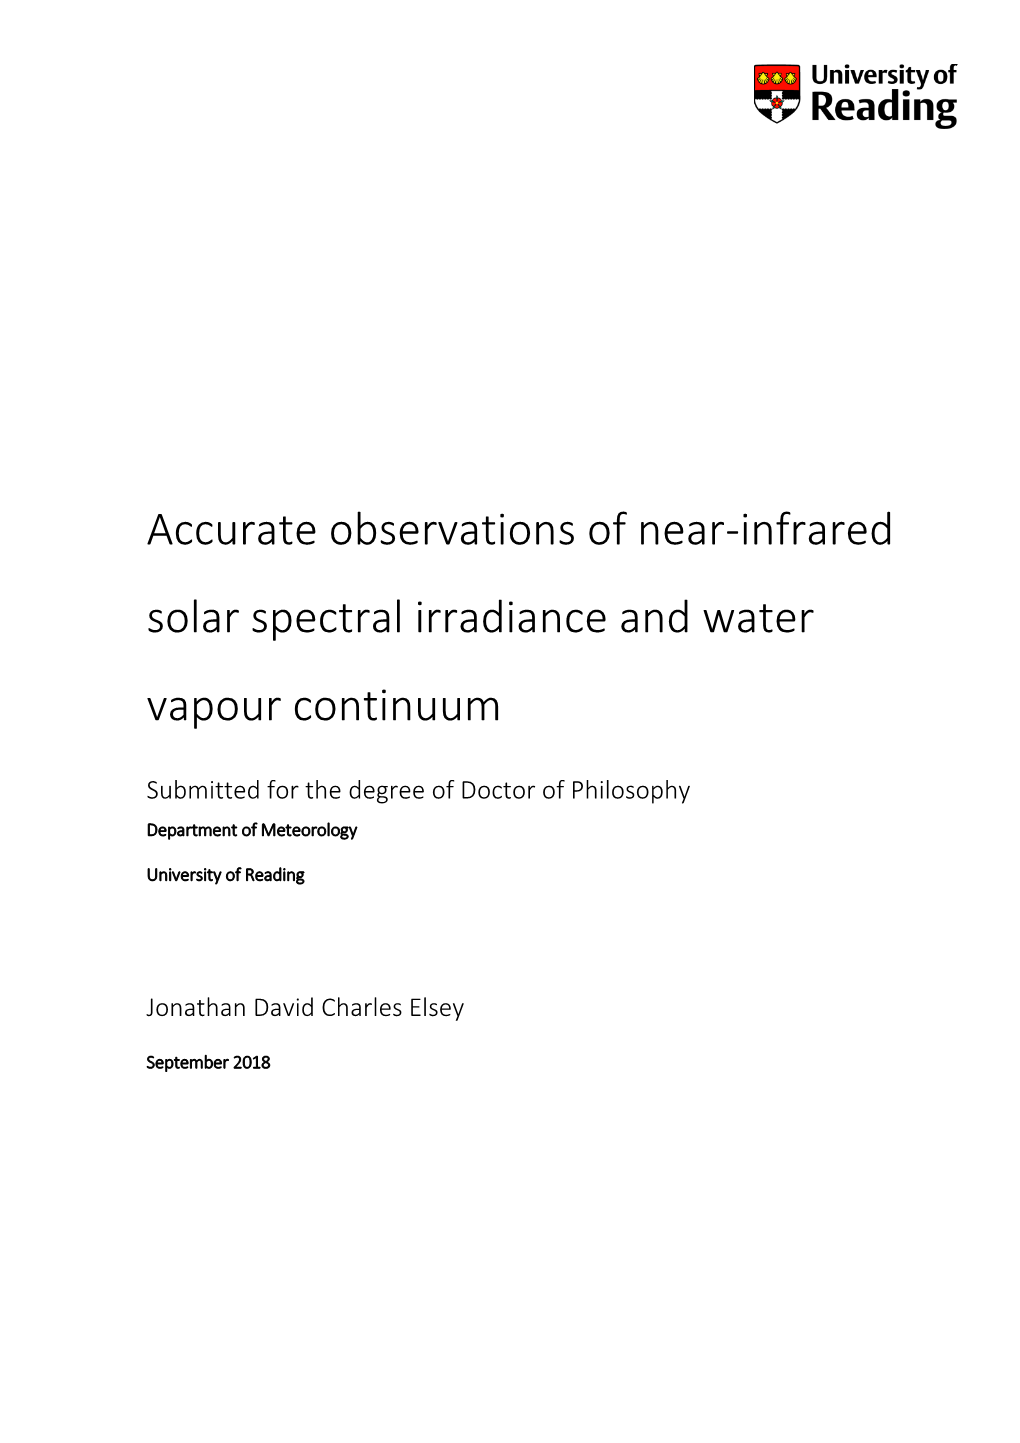 Accurate Observations of Near-Infrared Solar Spectral Irradiance and Water Vapour Continuum